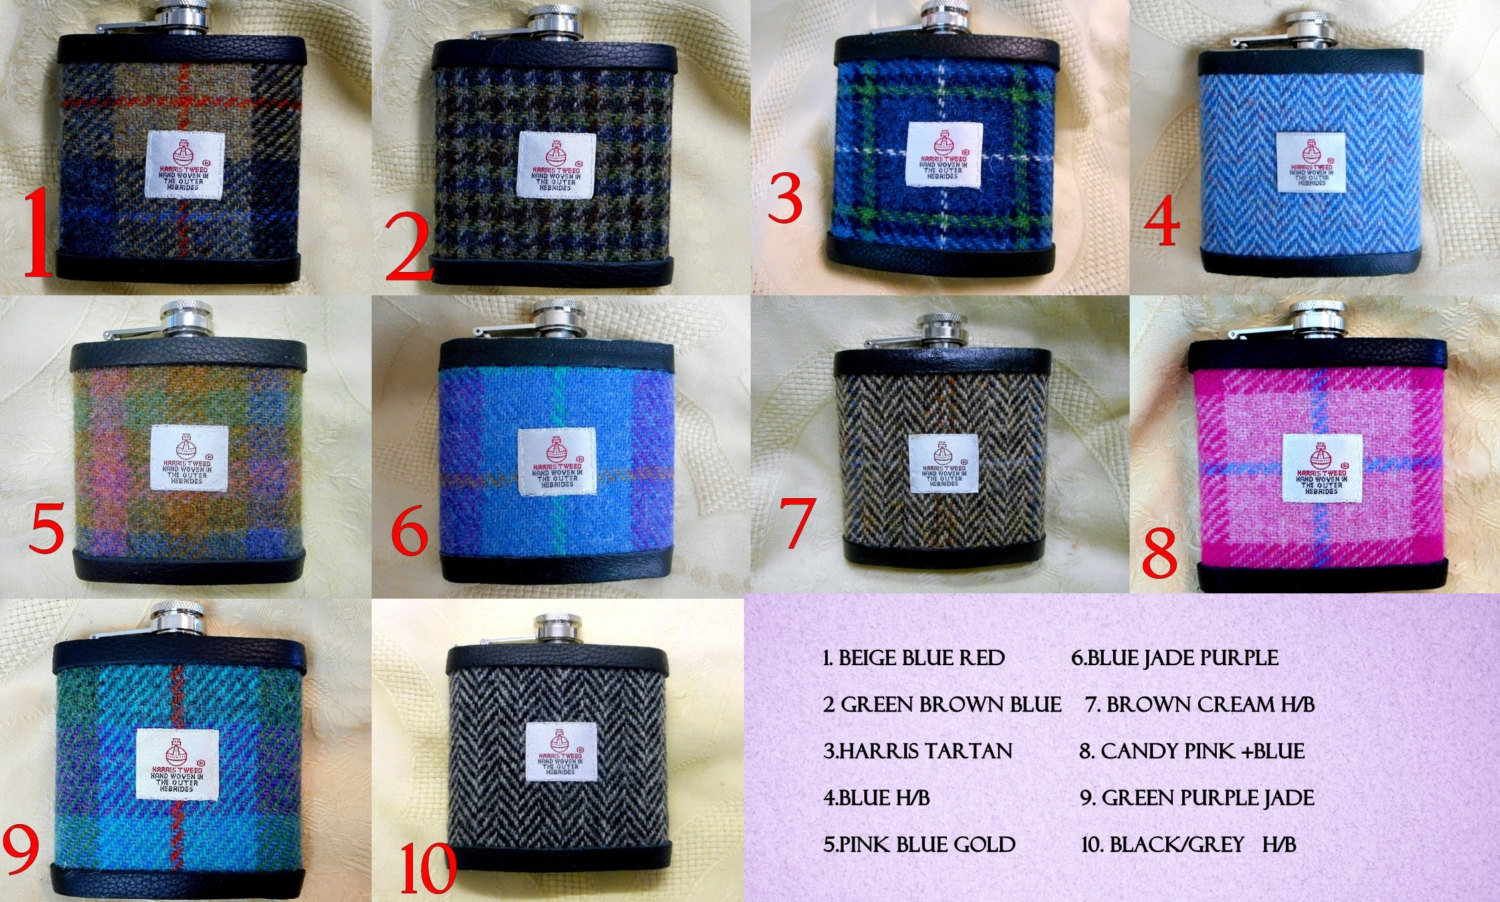 Brother of the Bride Harris Tweed hip flask with leather label, wide choice of tweeds, wedding gift or favour, Made in Scotland by Tweed with a Twist, Scottish rural  theme